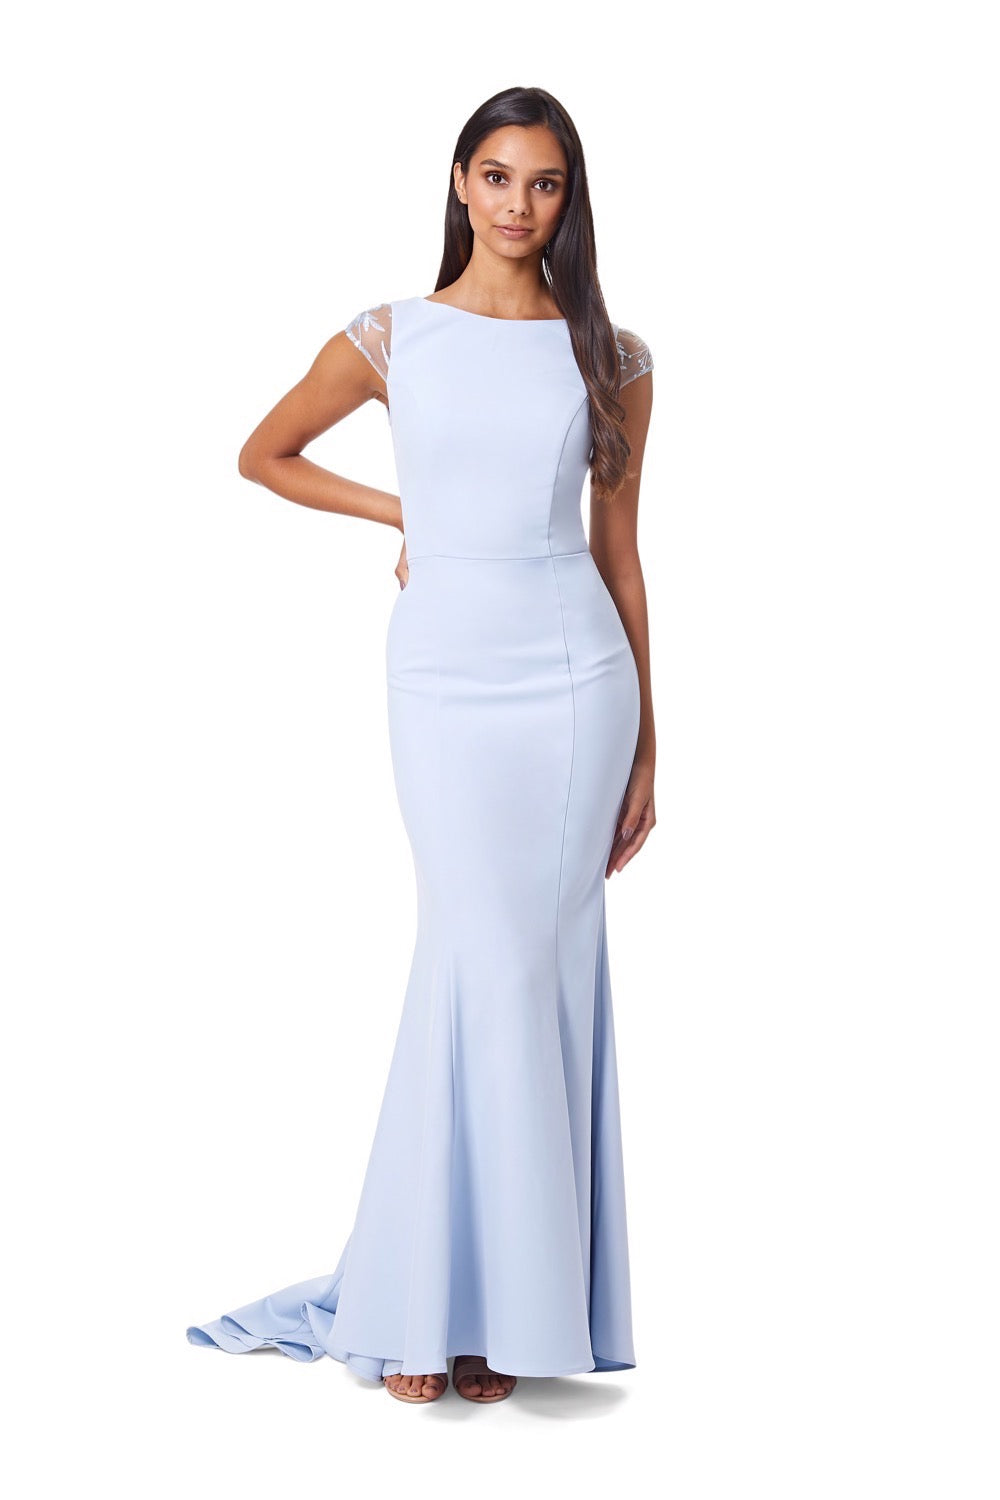 Masa Fishtail Maxi Dress with Lace Cap Sleeves and Embroidered Button Back, UK 14 / US 10 / EU 42 / Powder Blue